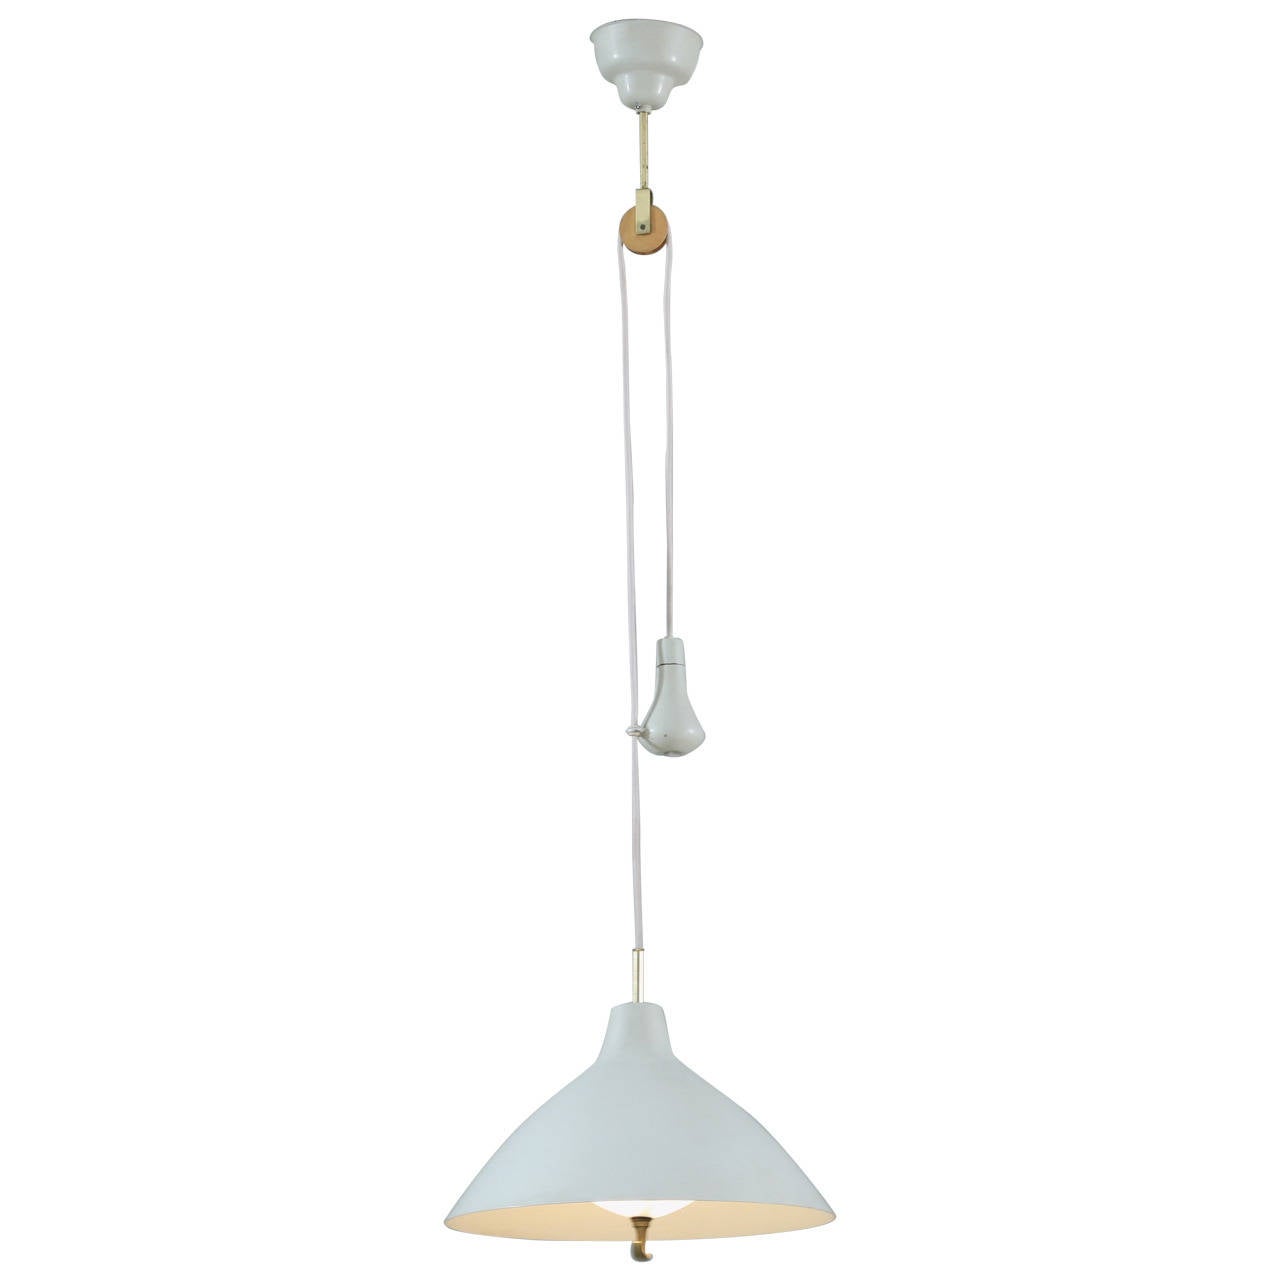 Lacquered ASEA pendant lamp with counterweight, 1950s